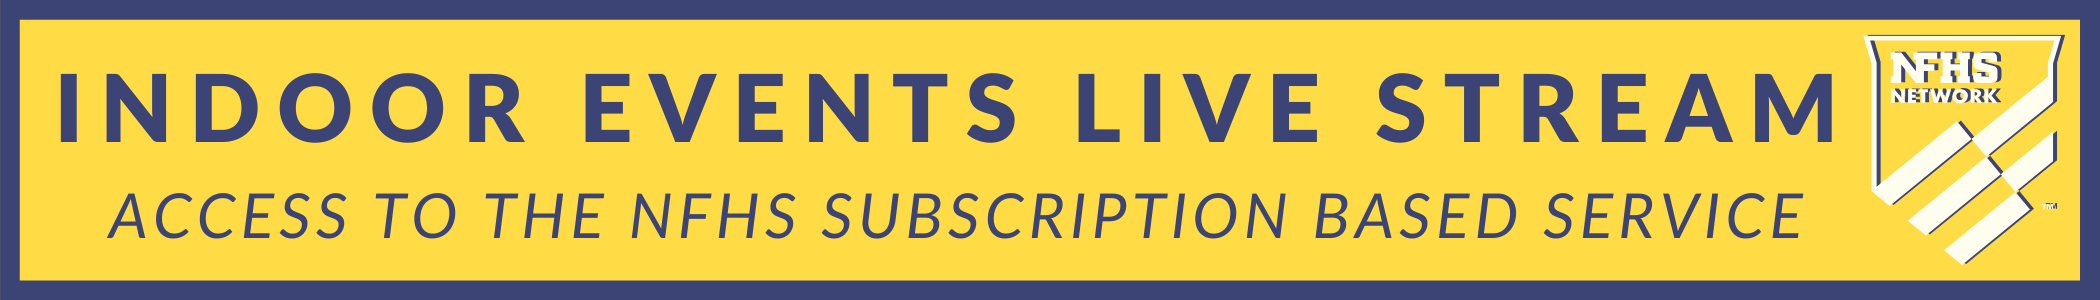 INDOOR EVENTS LIVE STREAM - ACCESS TO THE NFHS SUBSCRIPTION BASED SERVICE